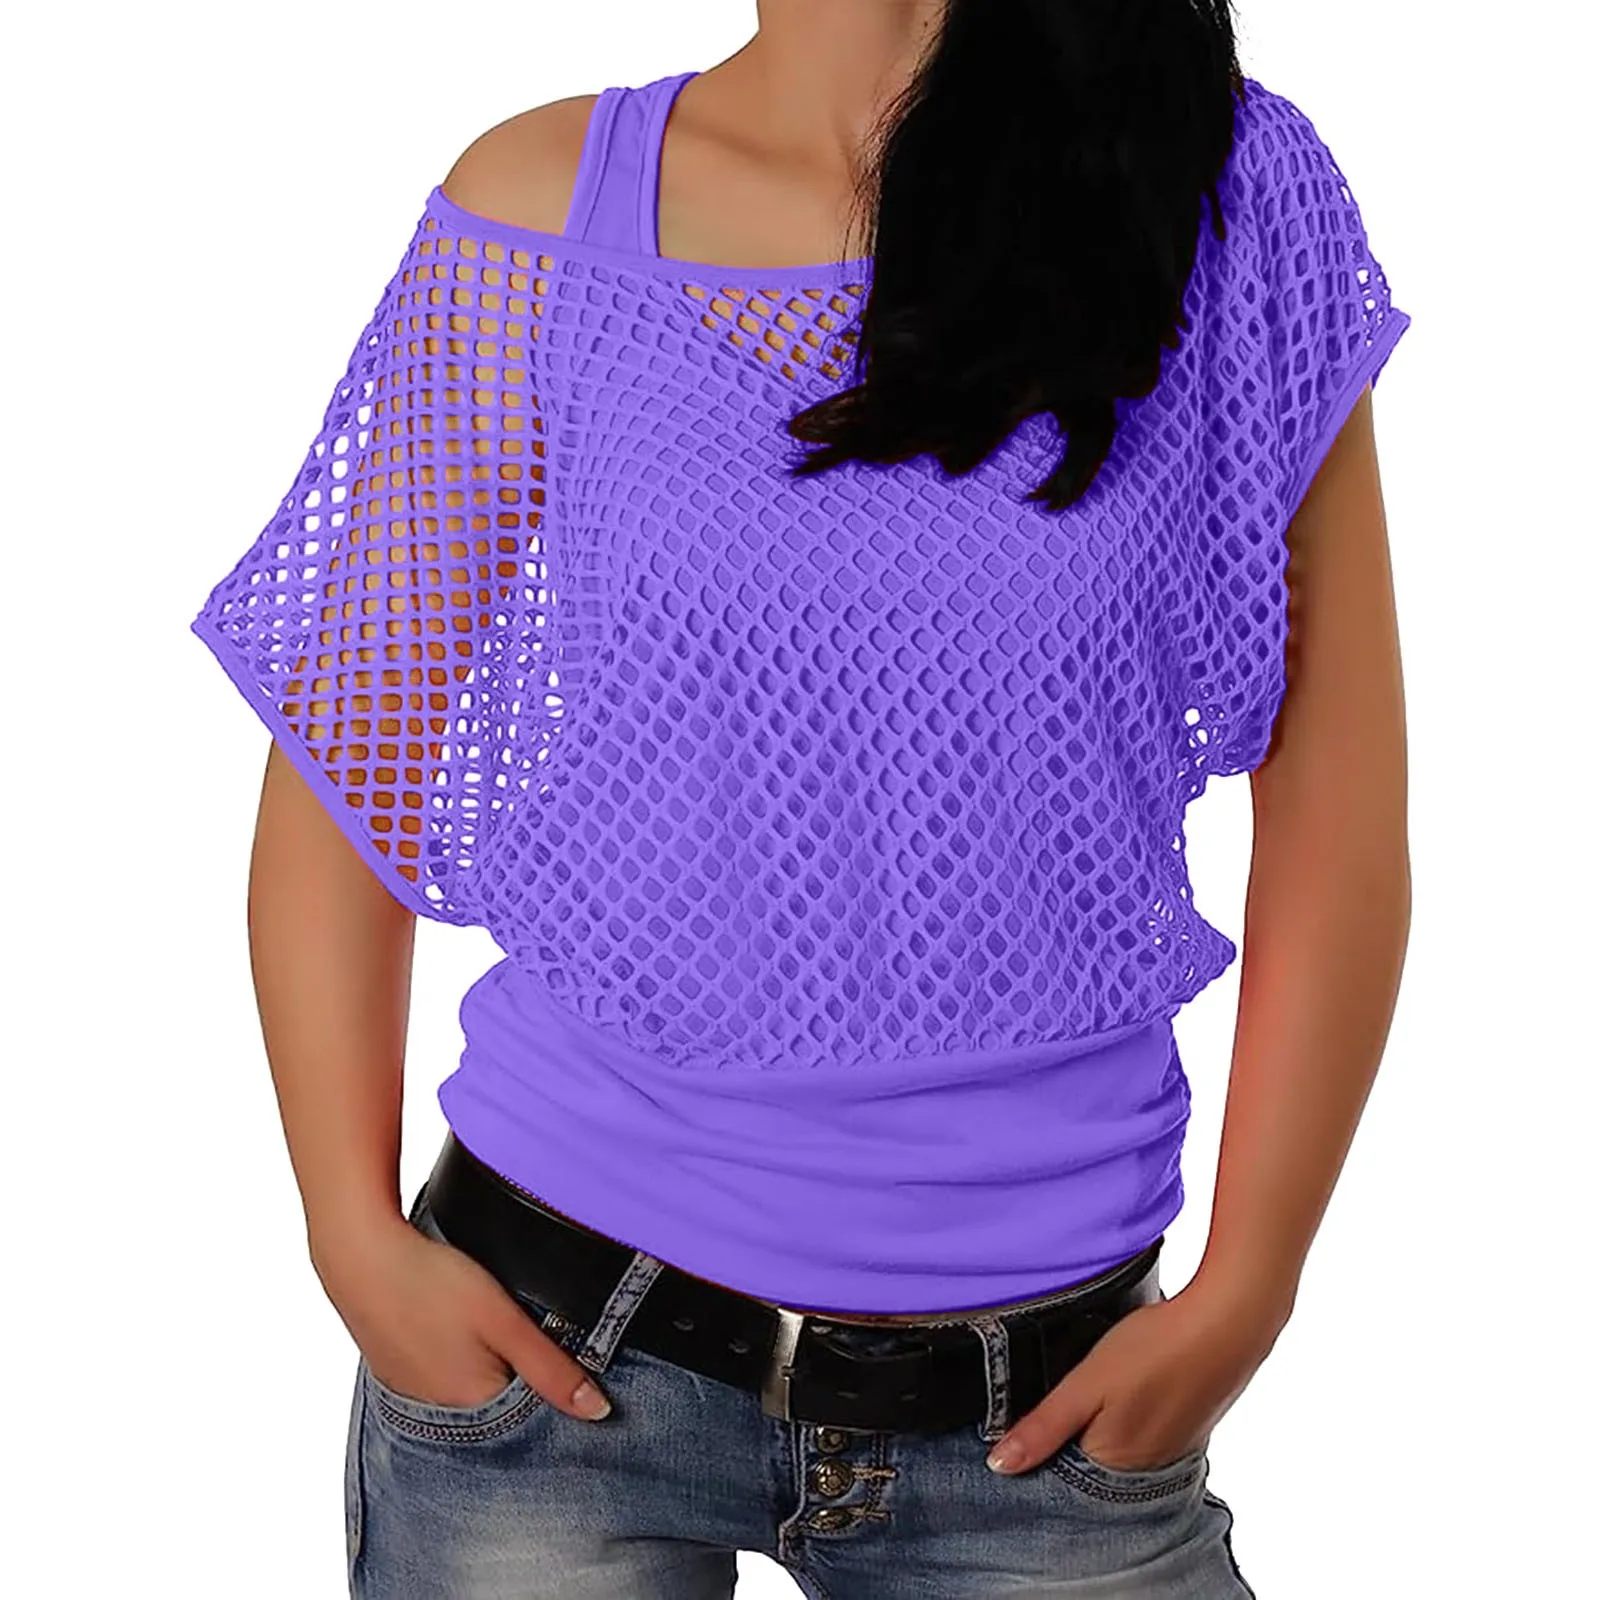 

Womens 80s T Shirts Vintage Neon Fishnet Mesh Top Off Shoulder Tops For Women Party Ball Short Sleeve Two Piece T Shirt Hot Pink